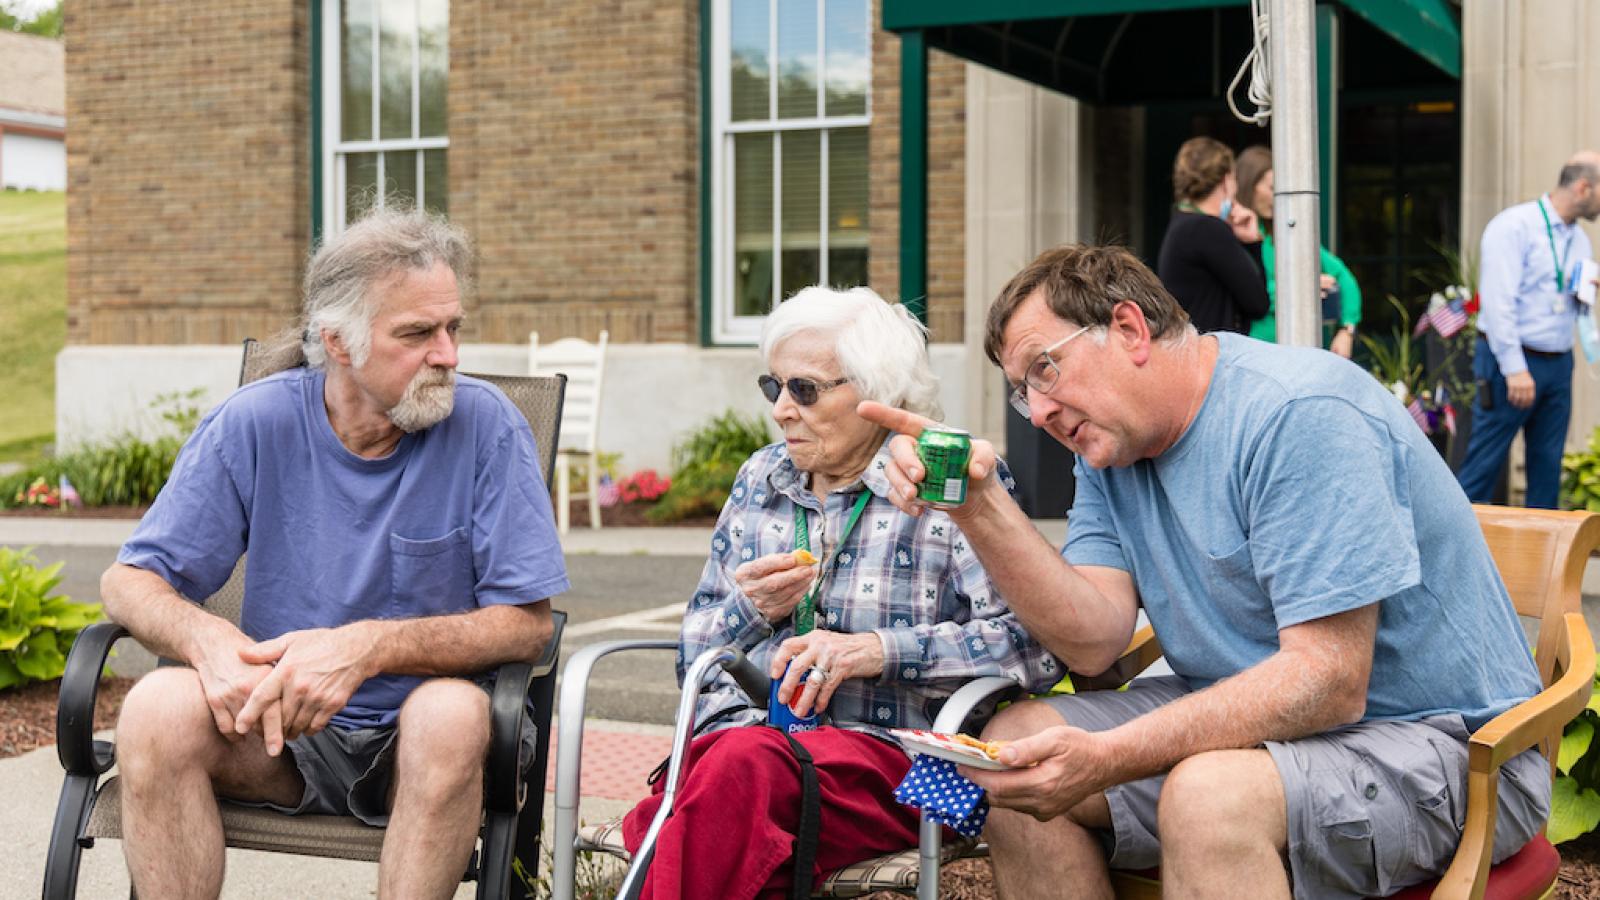 A resident visiting with family, outside during a community event.